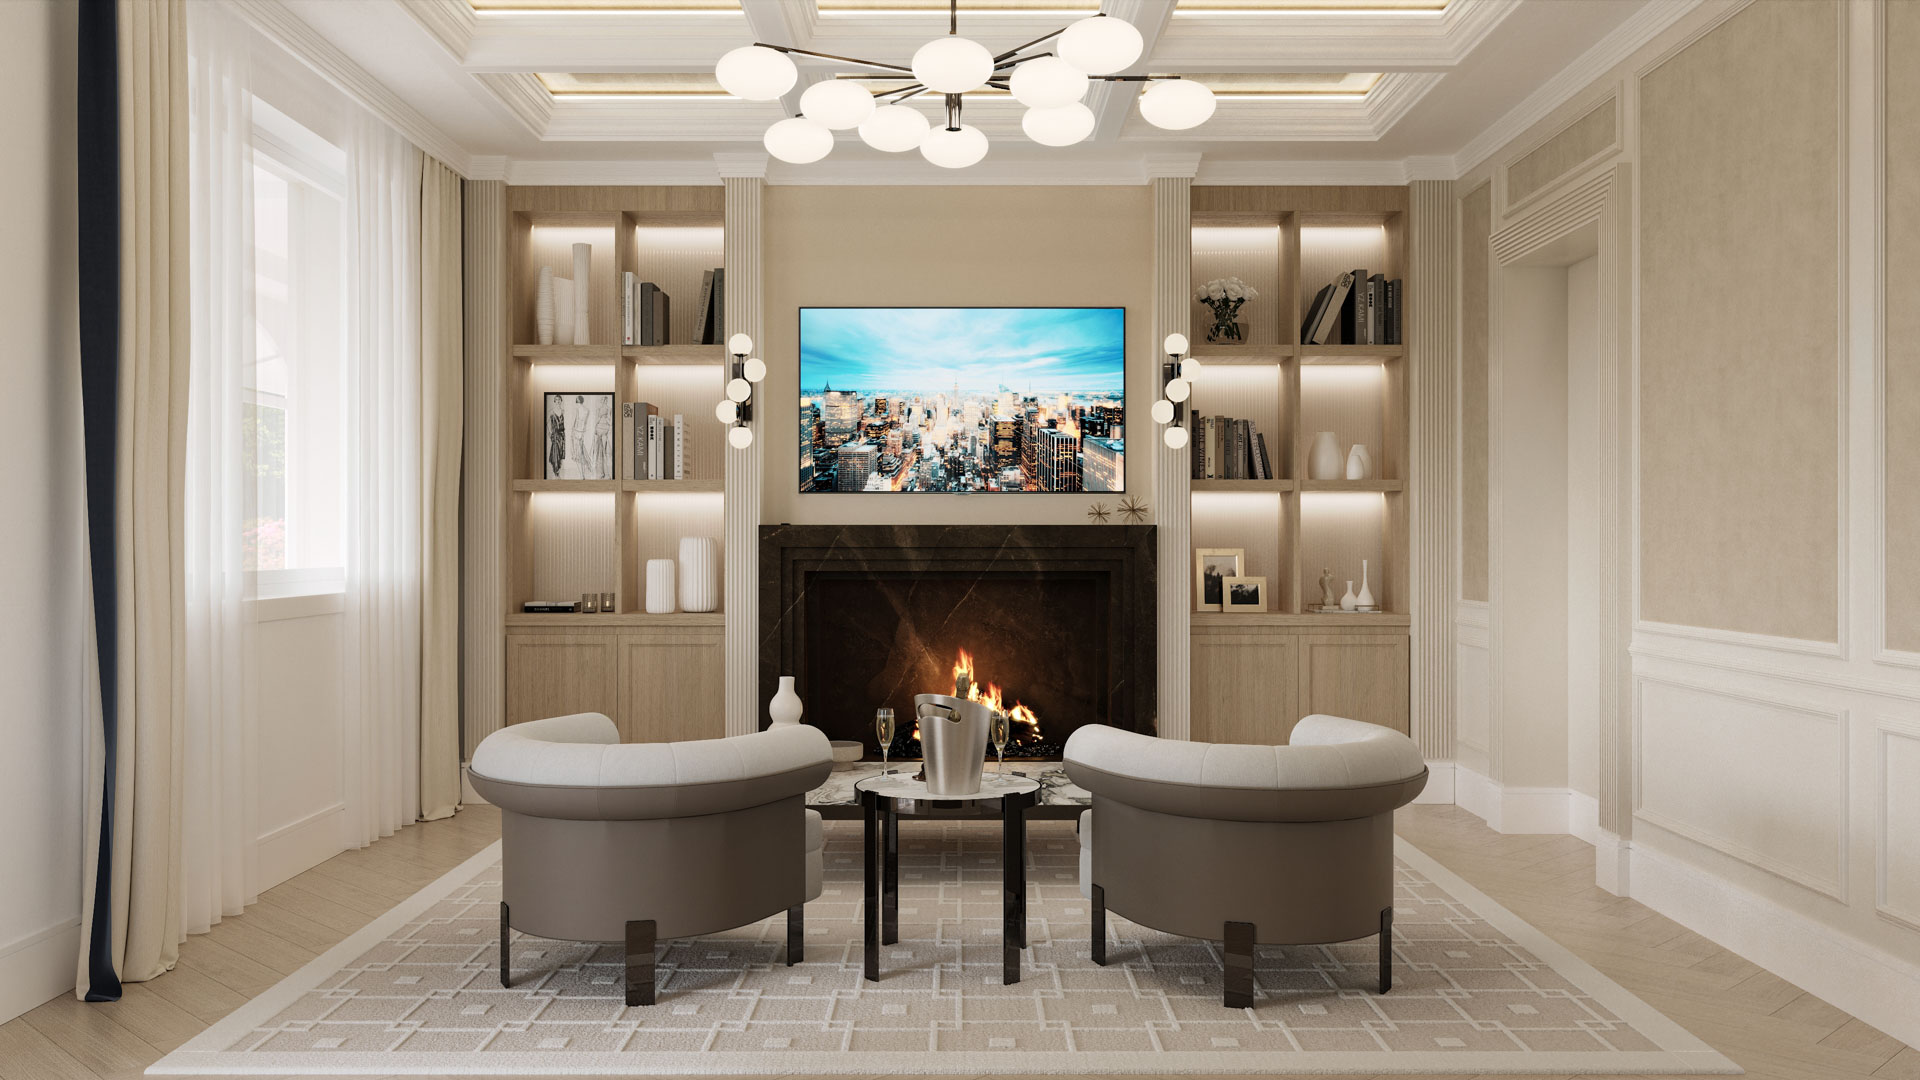 An elegant sitting room with a lit fireplace, a mounted TV, bookshelves, and two cozy chairs under a modern spherical chandelier.